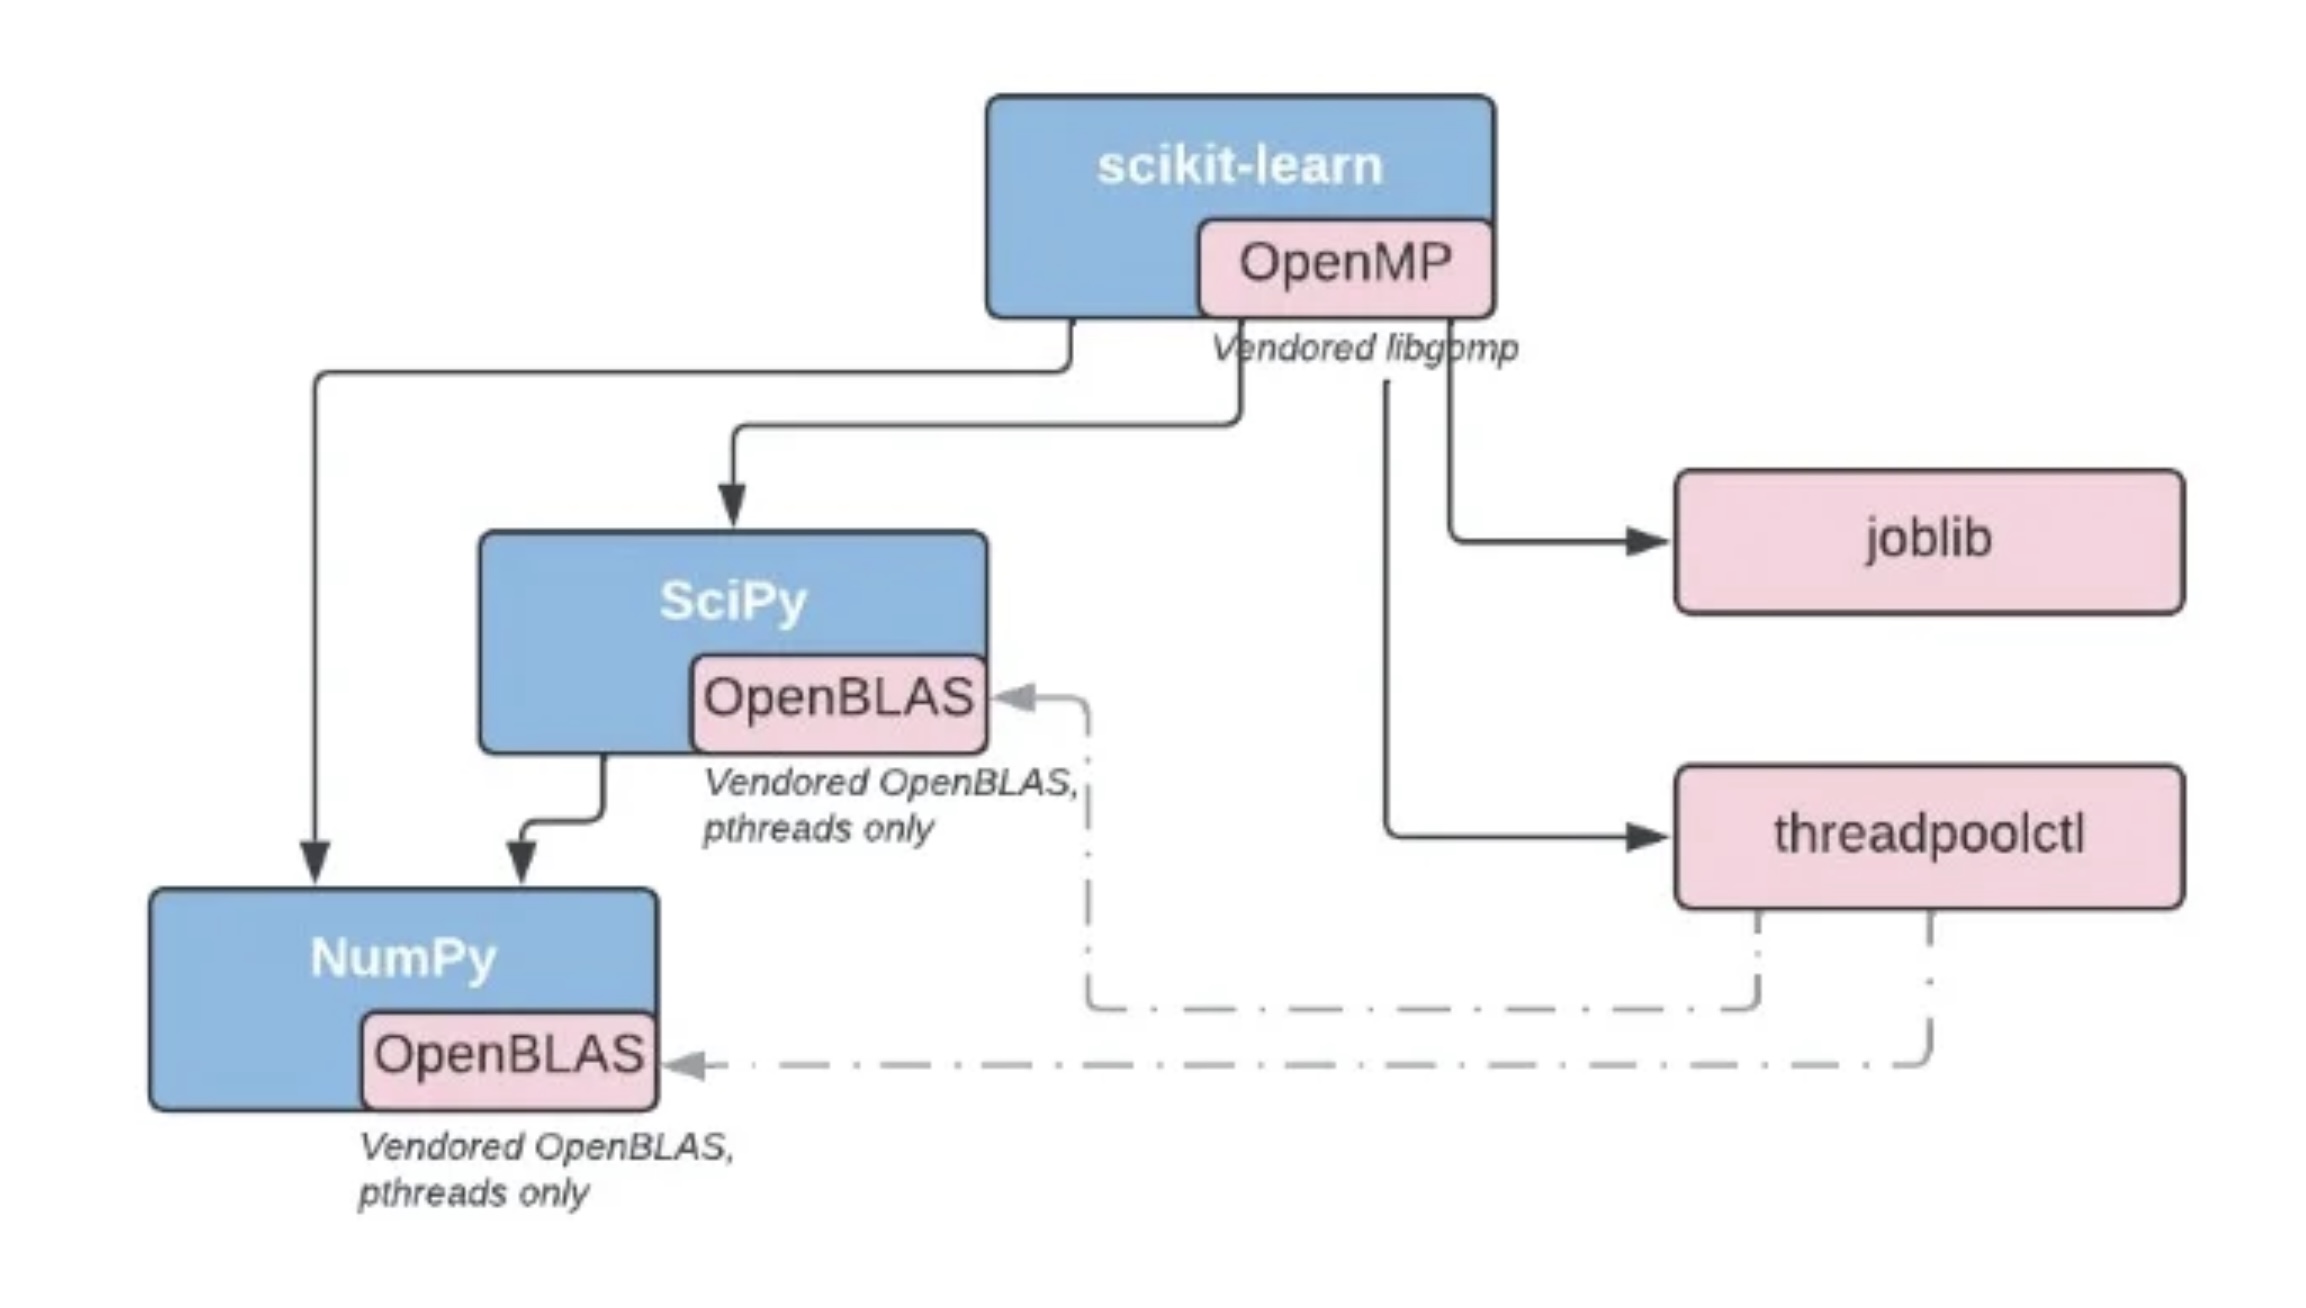 NumPy, SciPy, and Scikit-learn vendoring shared libraries such as OpenMP or OpenBLAS